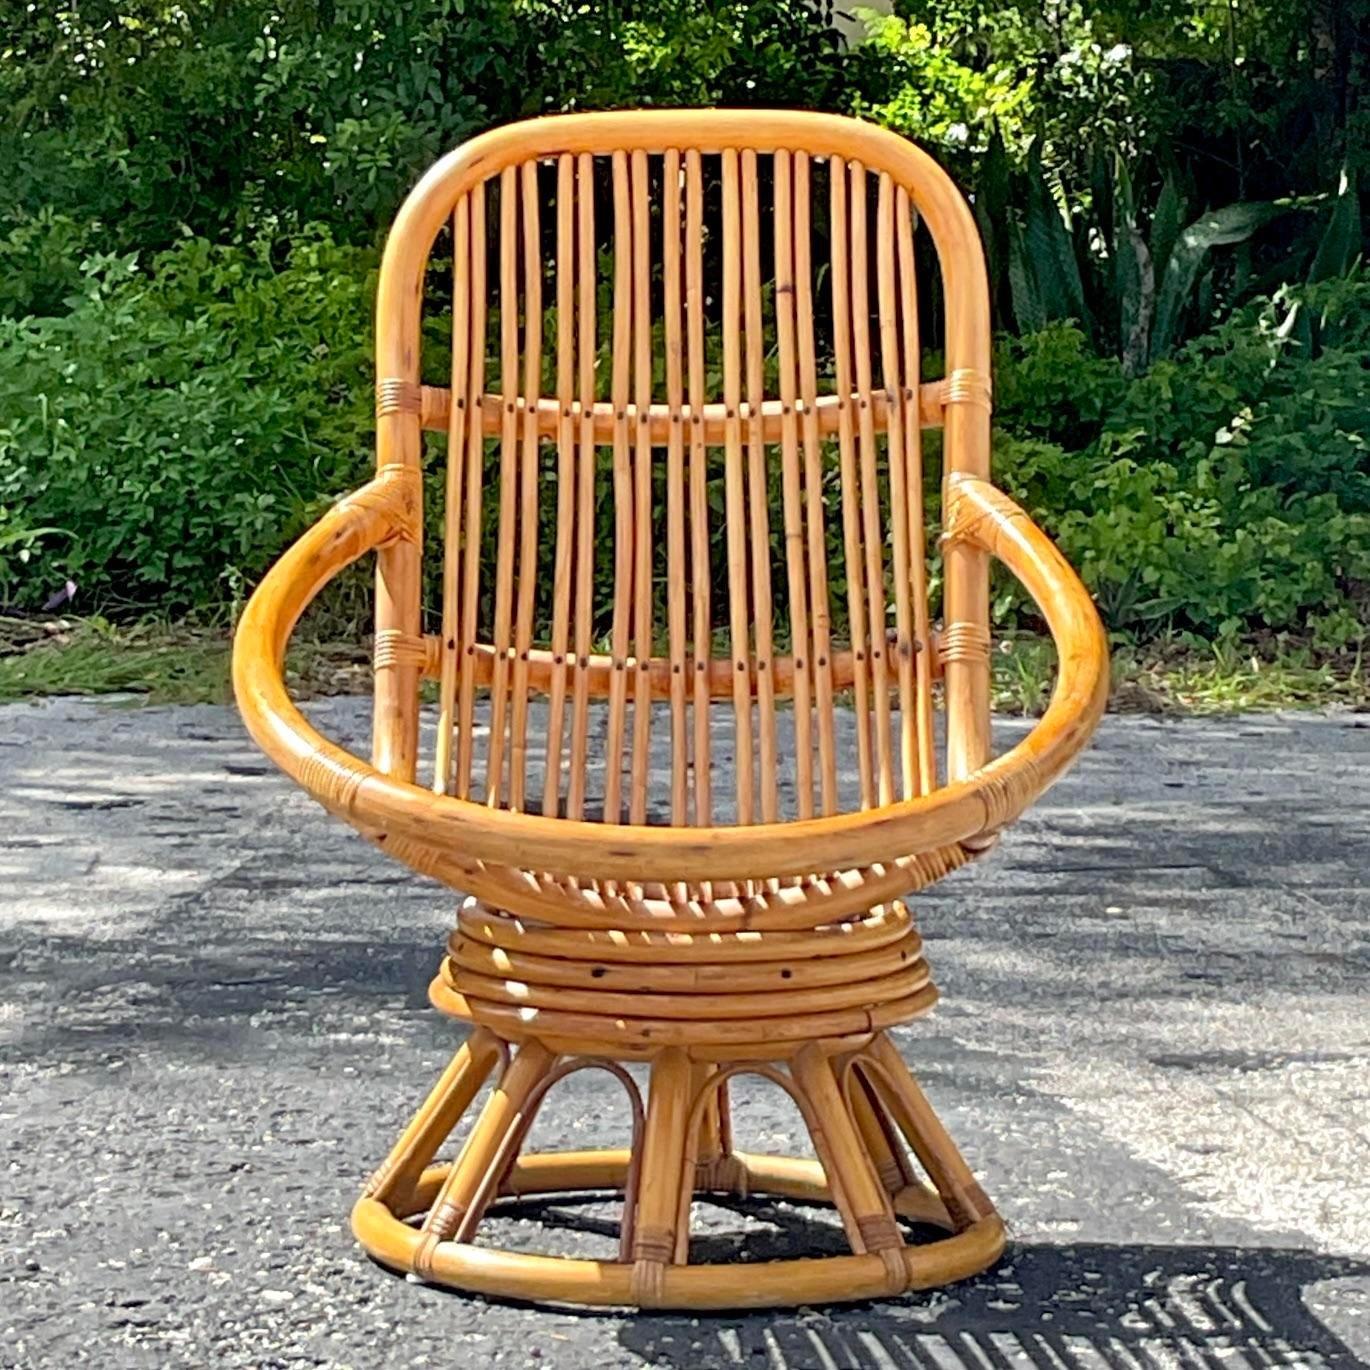 A fabulous vintage Coastal lounge chairs. A chic swivel design in a classic hoop shape. The perfect place to kick back and relax. Acquired from a Palm Beach estate. 